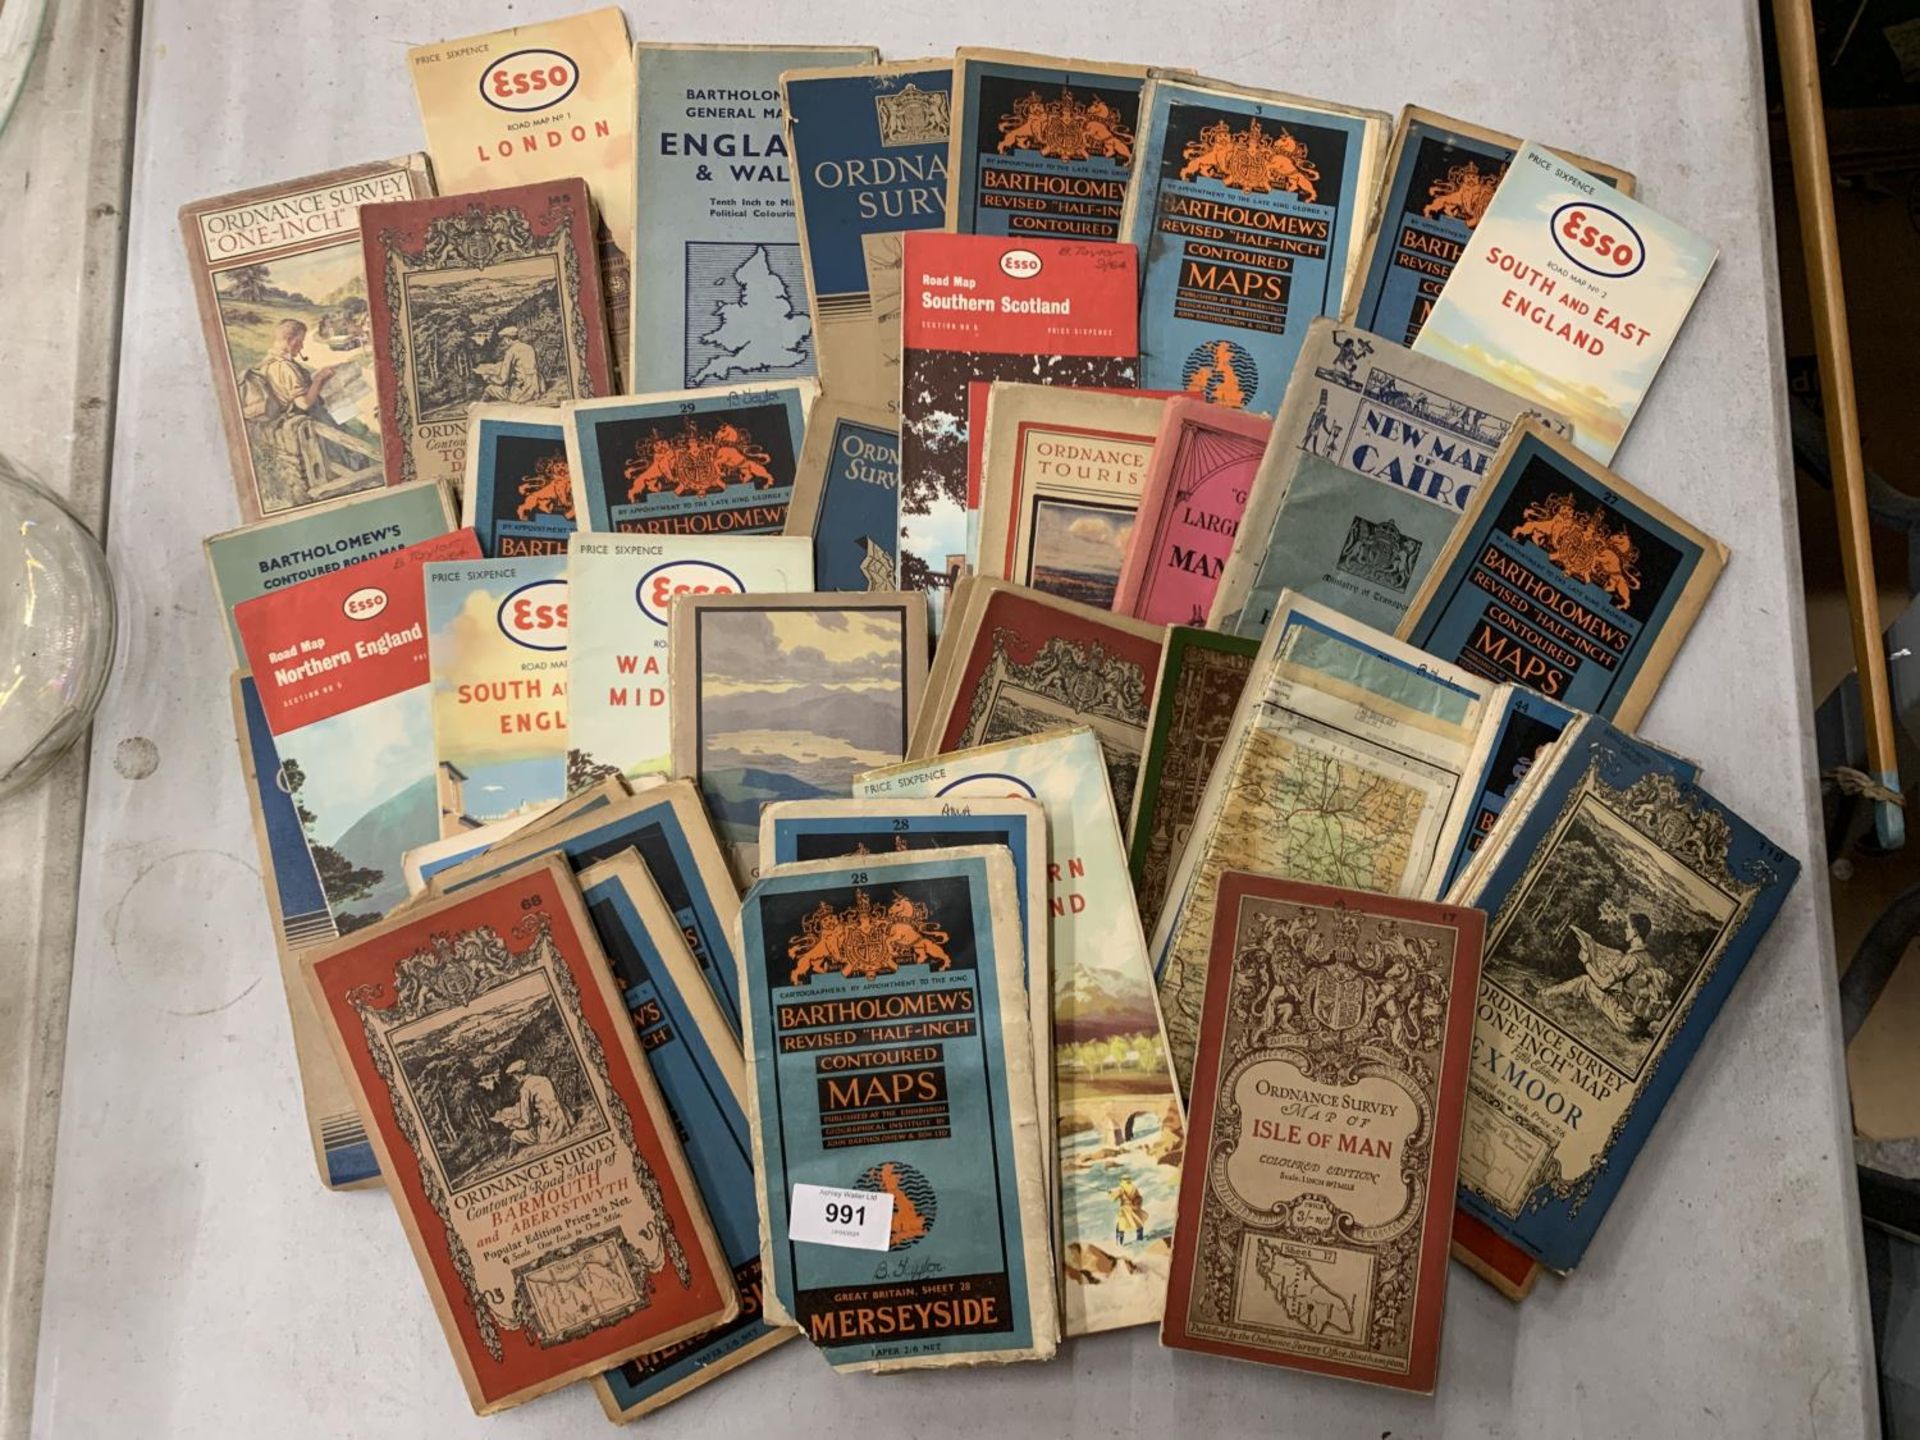 A COLLECTION OF VINTAGE ROAD MAPS TO INCLUDE ORDNANCE SURVEY AND BARTHOLOMEW'S